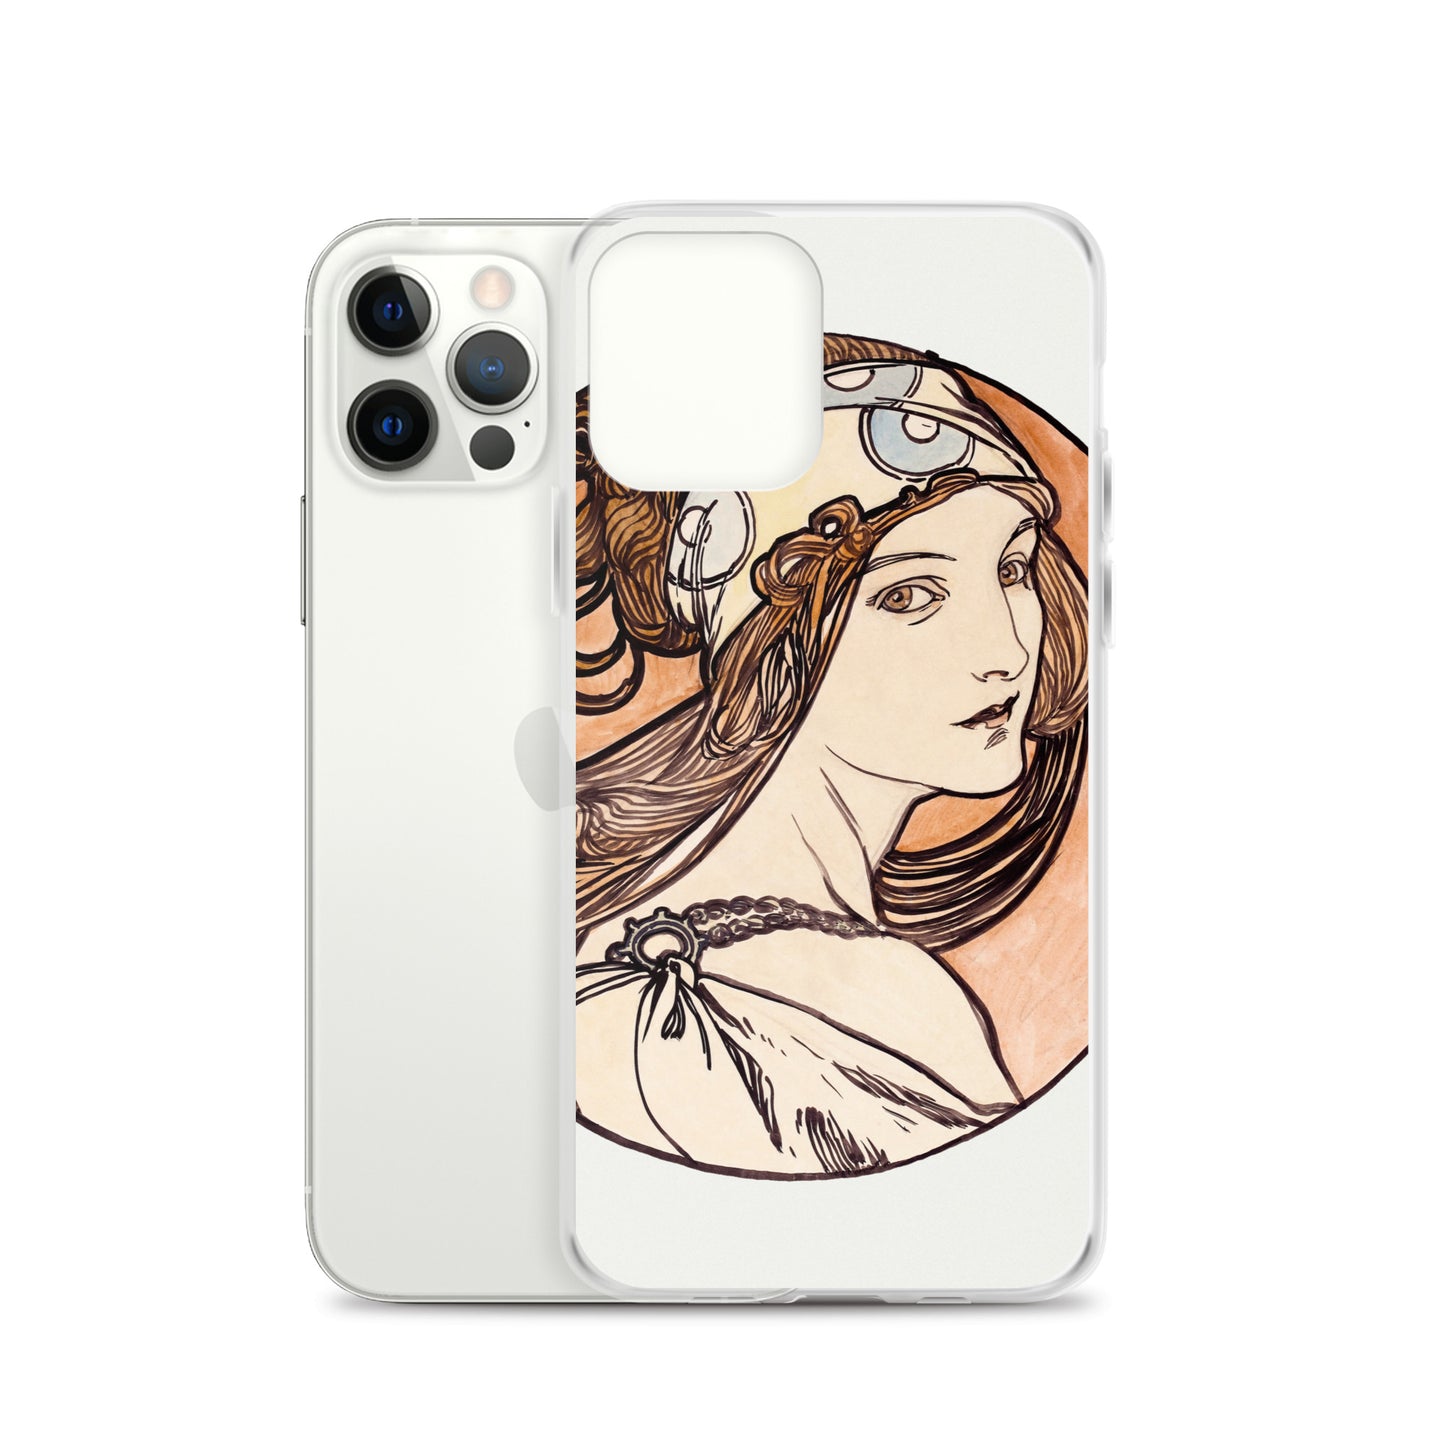 Stained glass window for the facade of the Fouquet boutique iPhone case